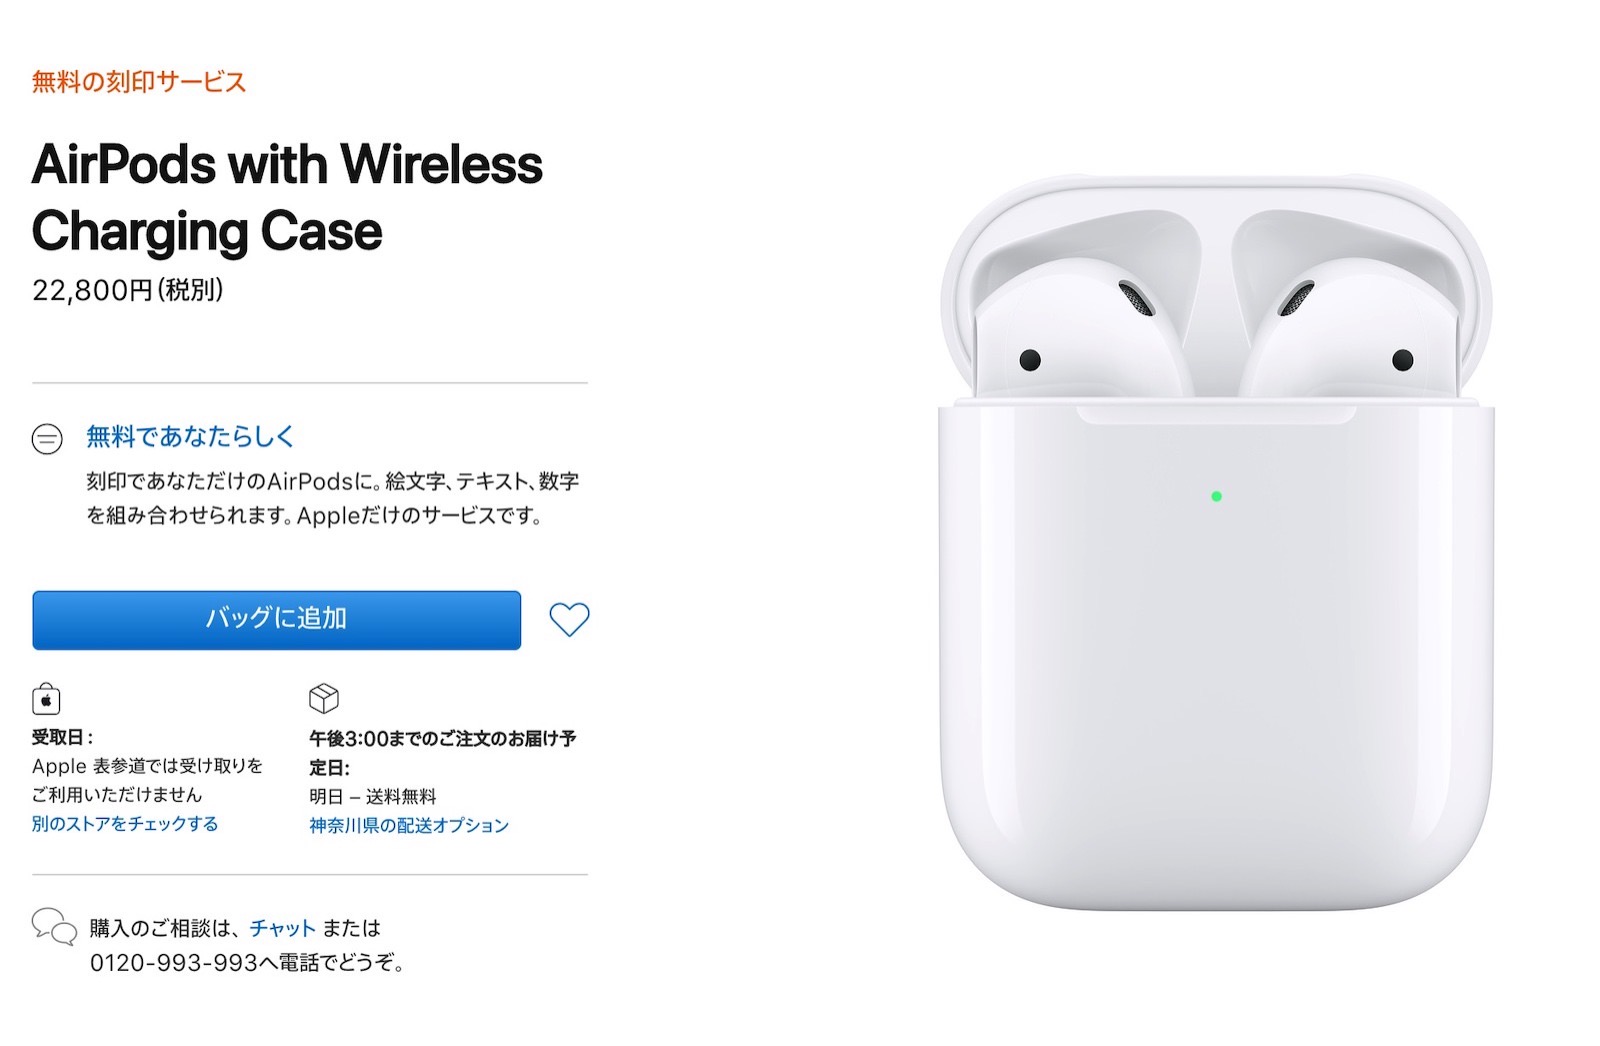 airpods-with-wireless-charging-case.jpg